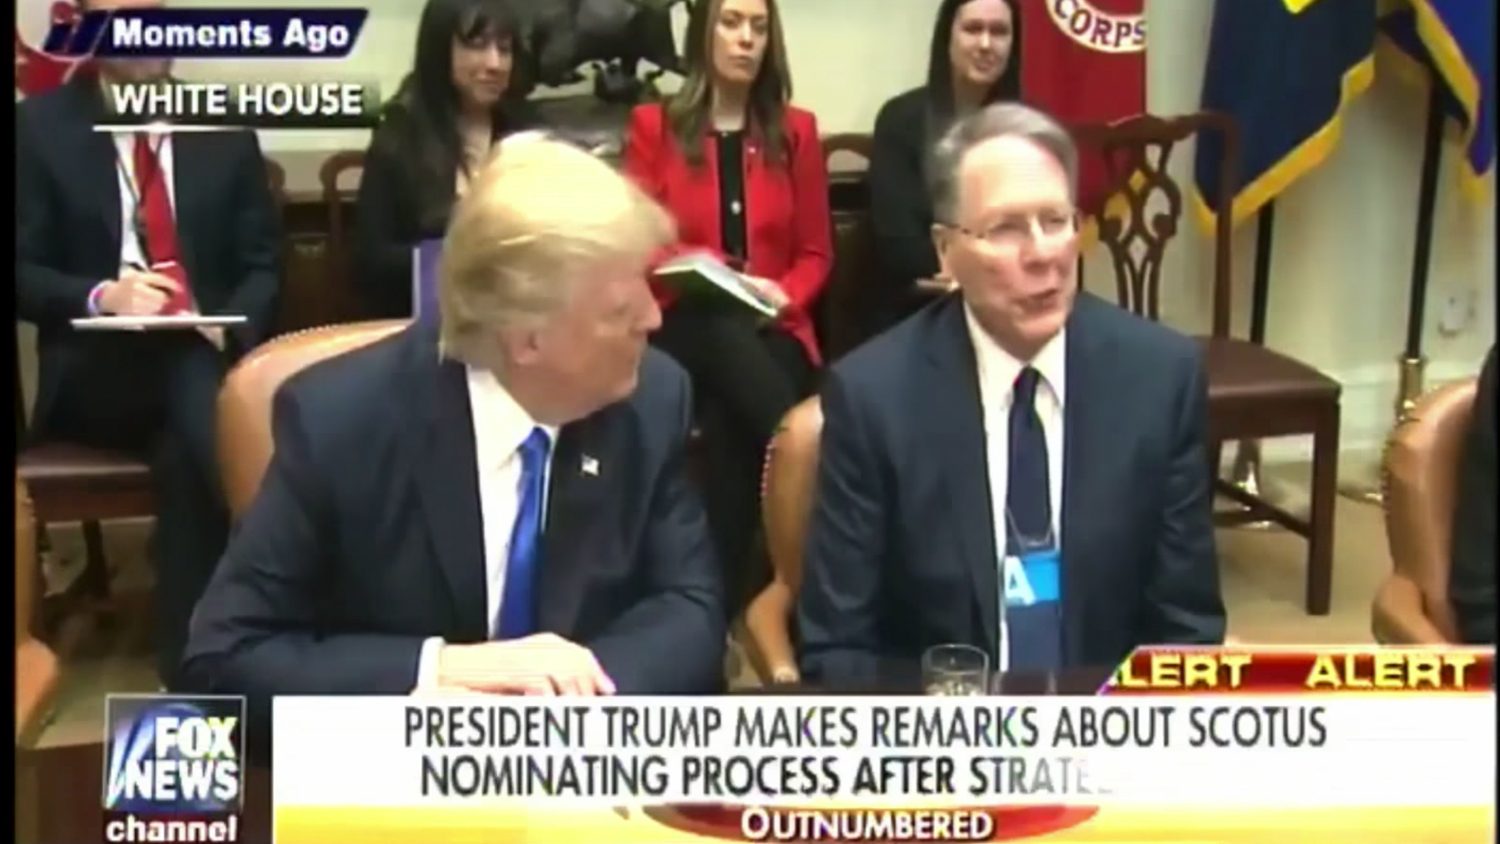 Wayne LaPierre, President Trump: Side-by-Side at White House Meeting